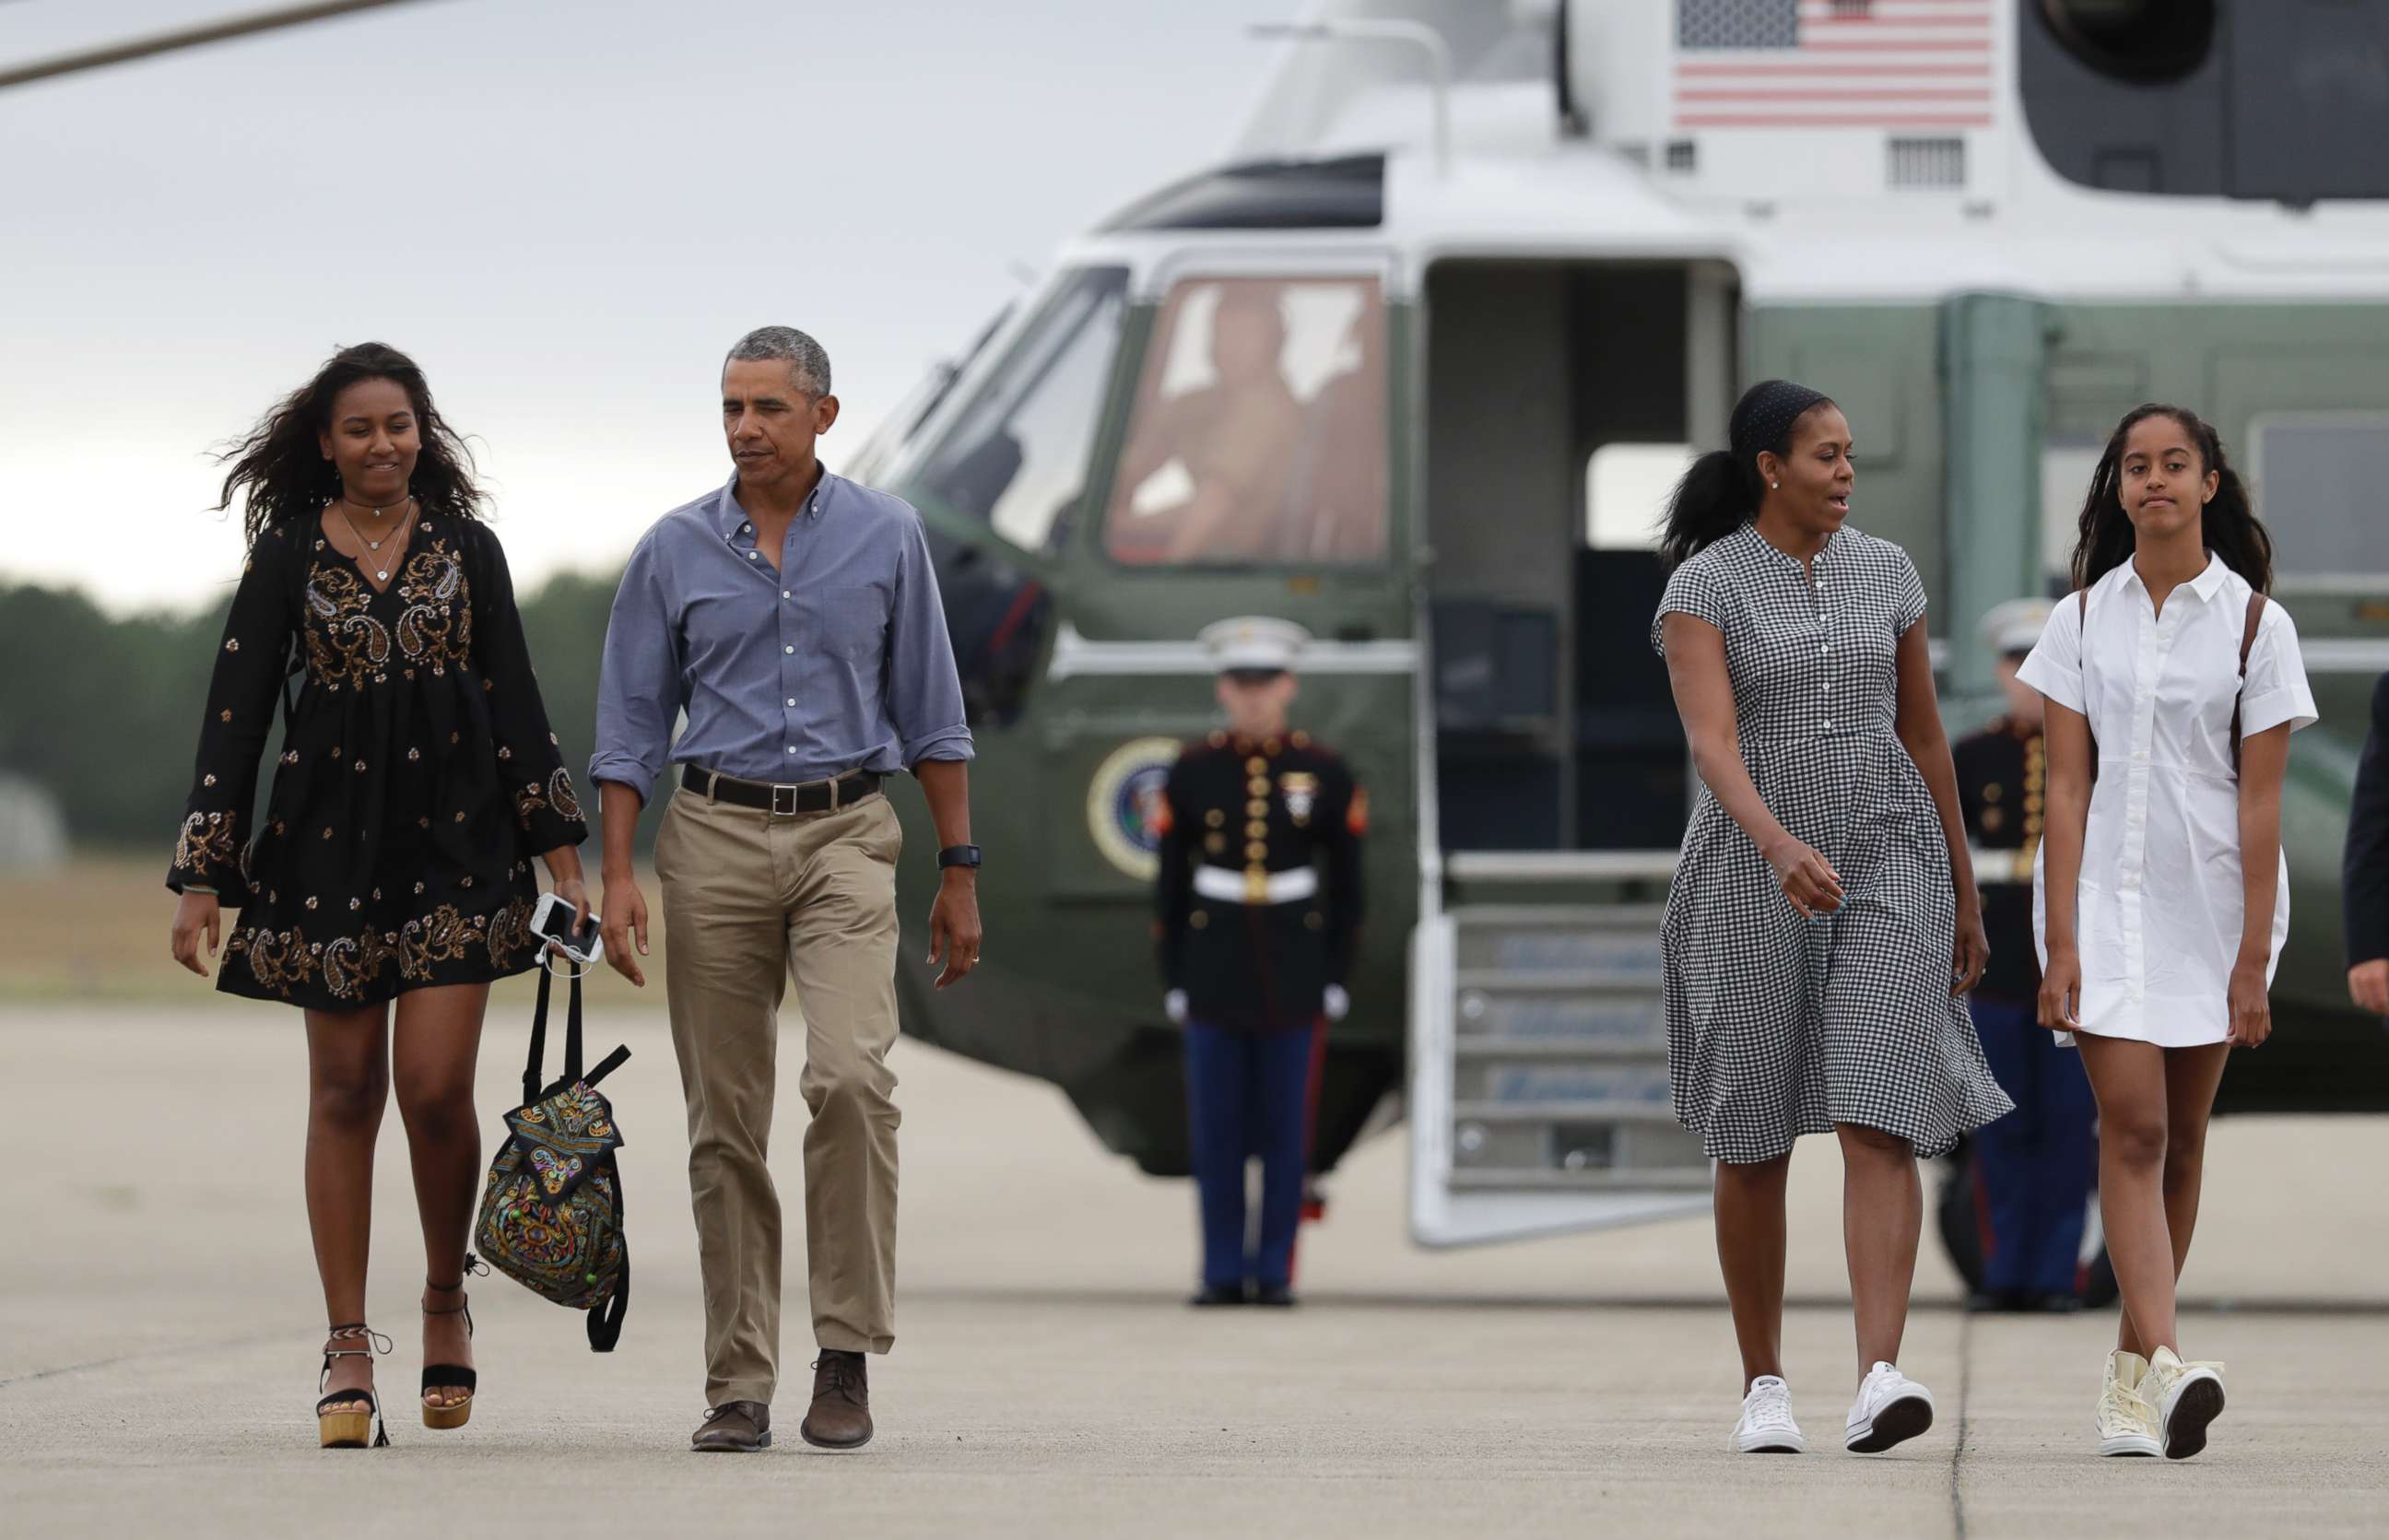 PHOTO: President Barack Obama with first lady Michelle Obama and their daughters Malia, right, and Sasha, left, walk on the tarmac to board Air Force One at Air Station Cape Cod in Mass., Sunday, Aug. 21, 2016.